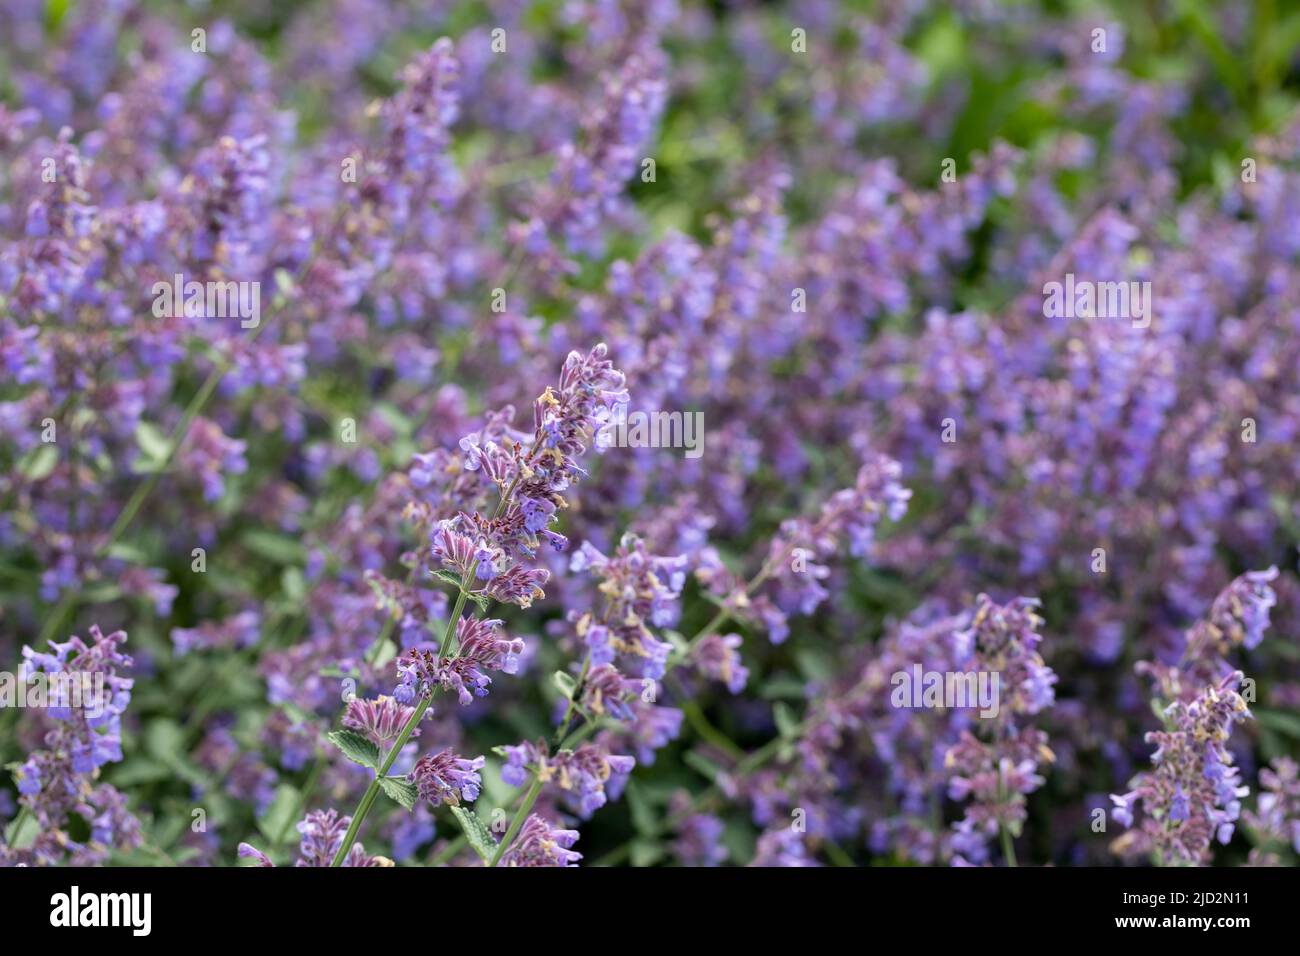 Nepeta grandiflora, Caucasus catmint flowers in an English garden in early summer Stock Photo